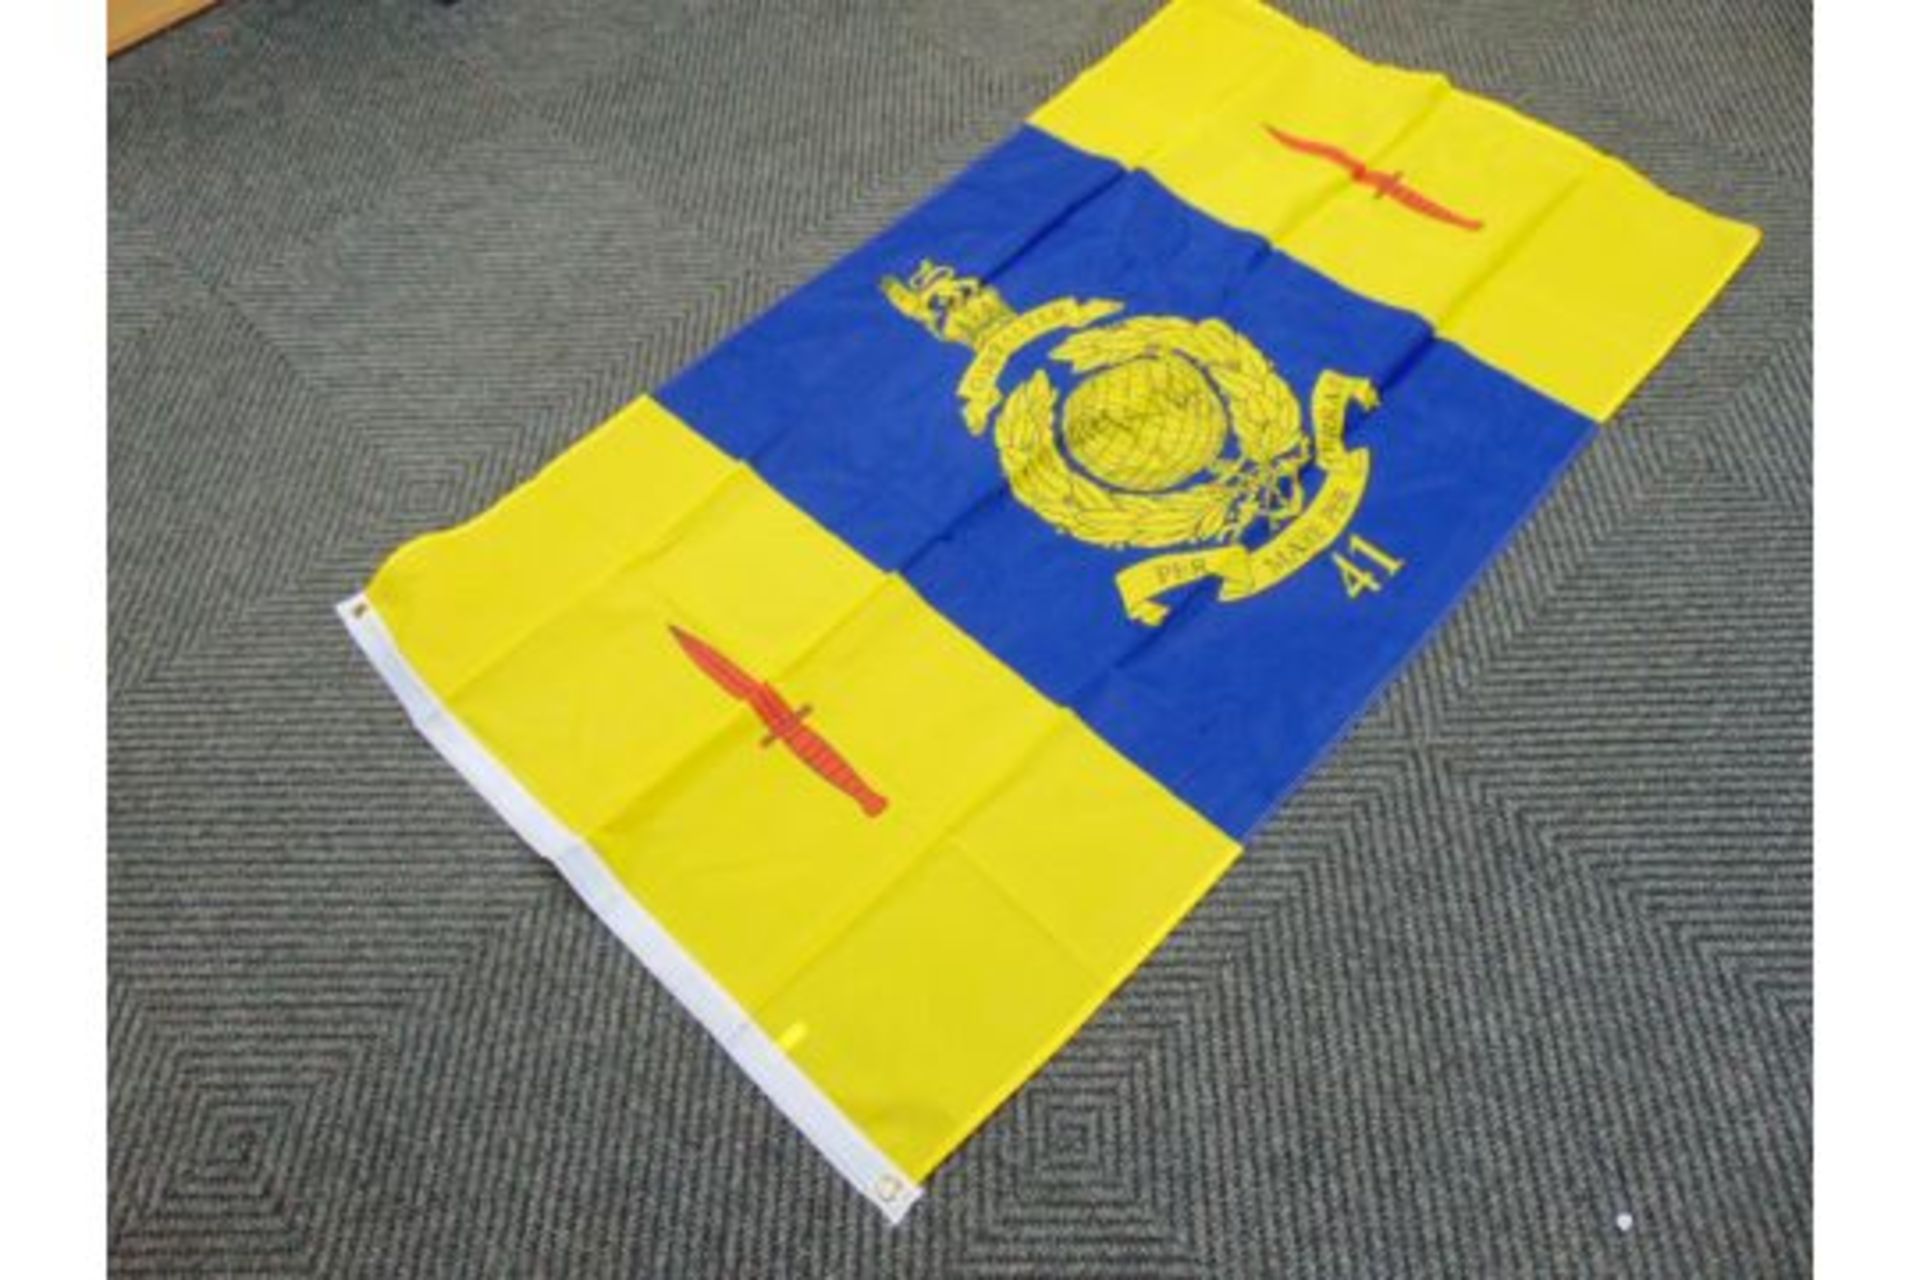 41 Commando Royal Marines Flag - 5ft x 3ft with Metal Eyelets. - Image 4 of 4